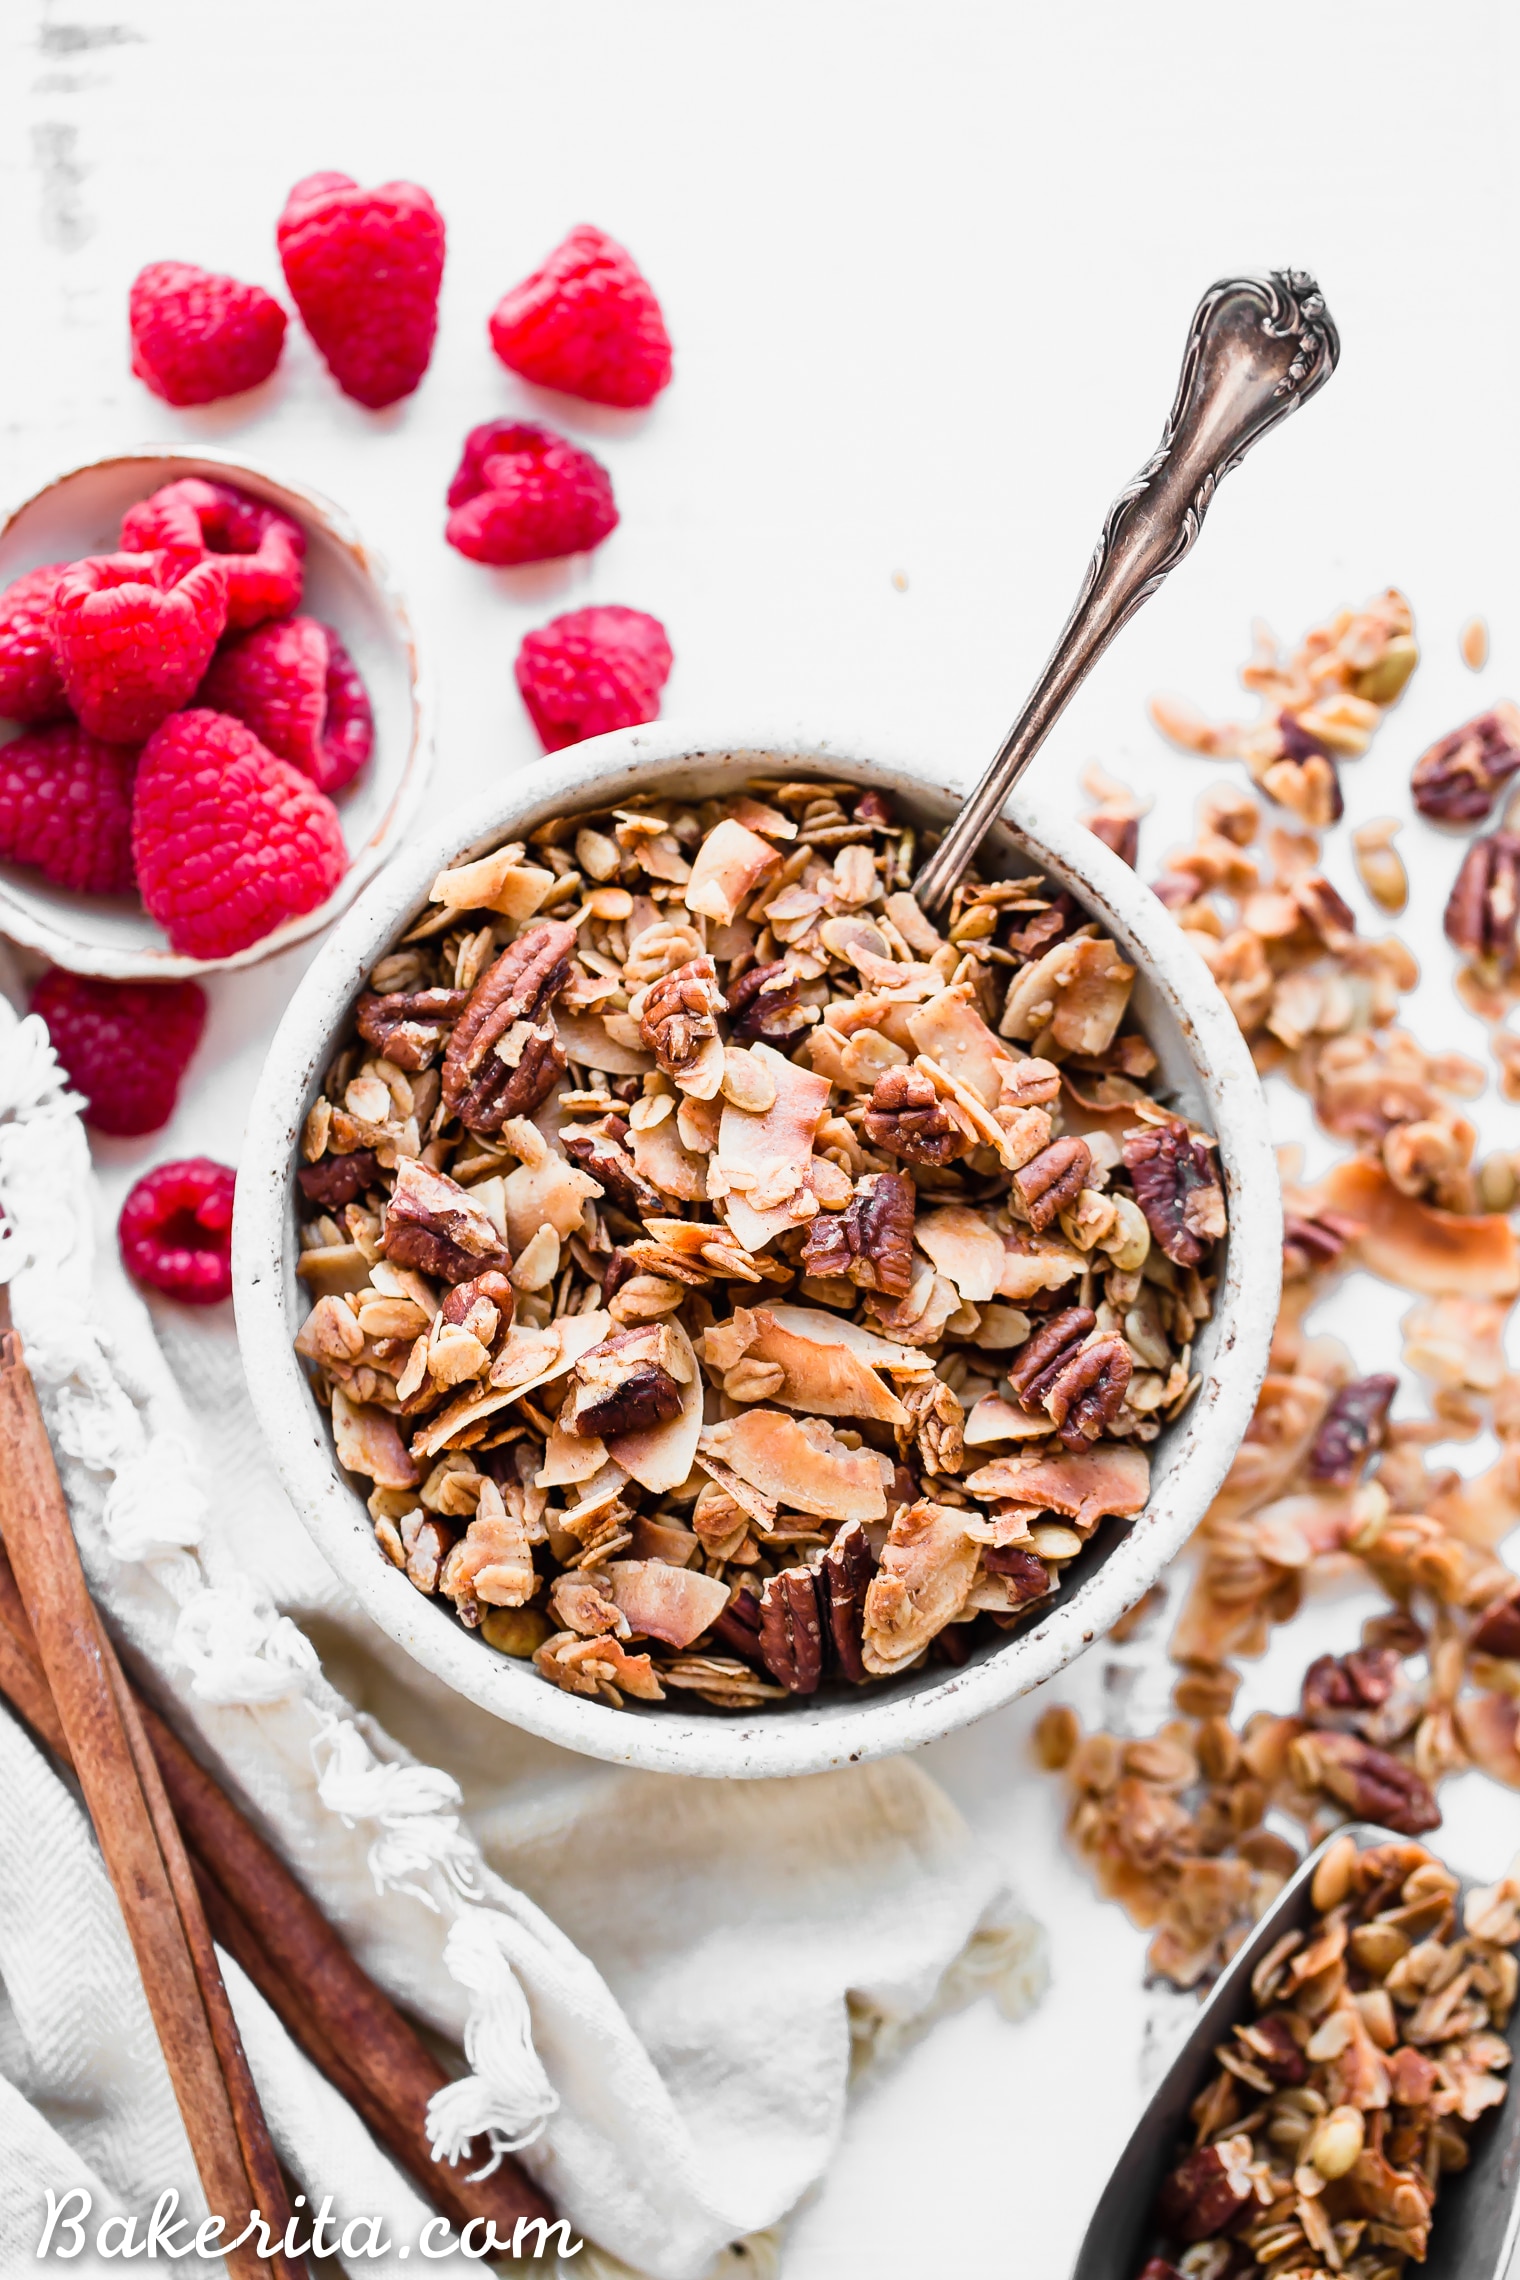 This Coconut Pecan Granola is a flavorful, crunchy, and just lightly sweetened with maple syrup. This gluten-free, refined sugar-free, and vegan granola is perfect for stirring into your yogurt, serving with milk or eating on its own as a snack.